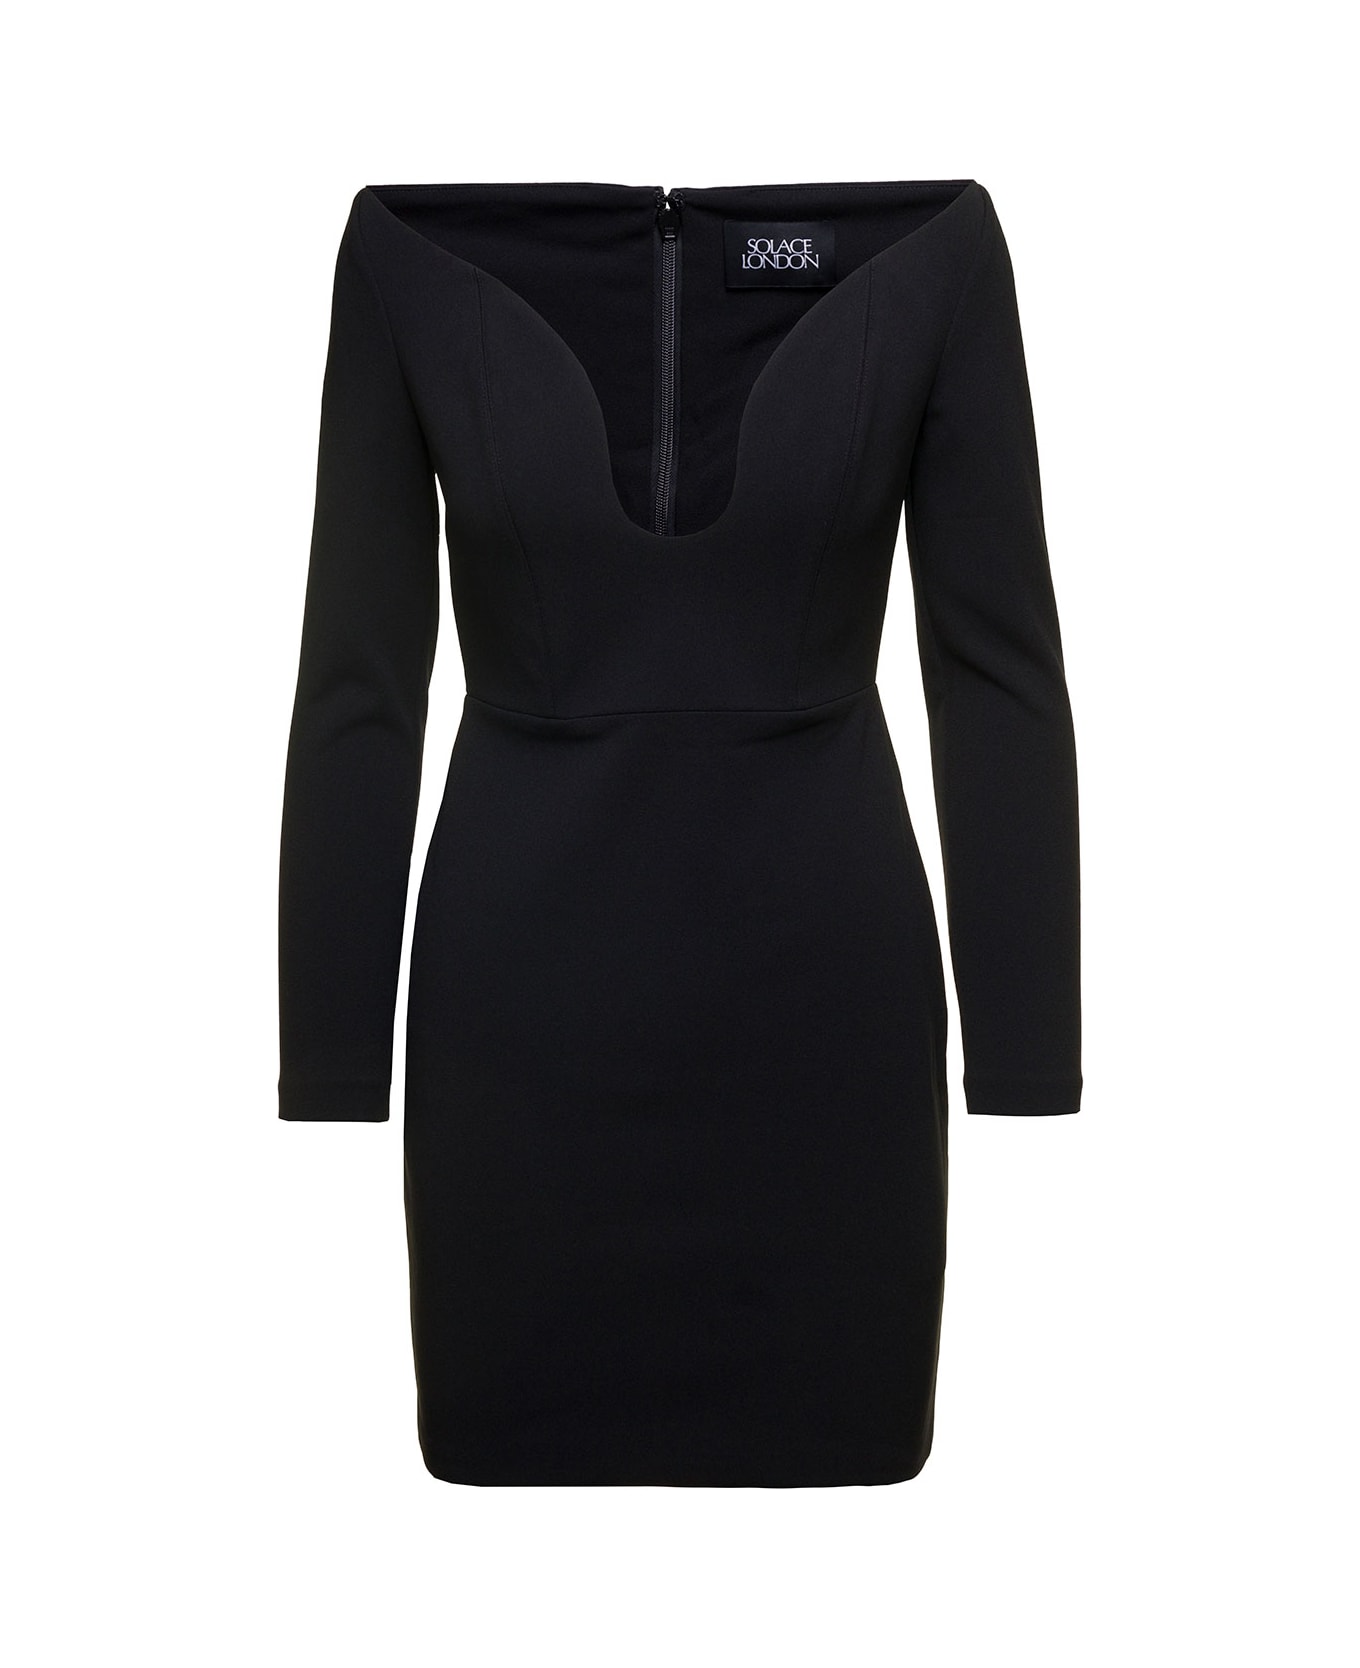 Solace London Black ' Uma' Mini Dress With Long Sleeves And U-neck In Polyester Woman - Black